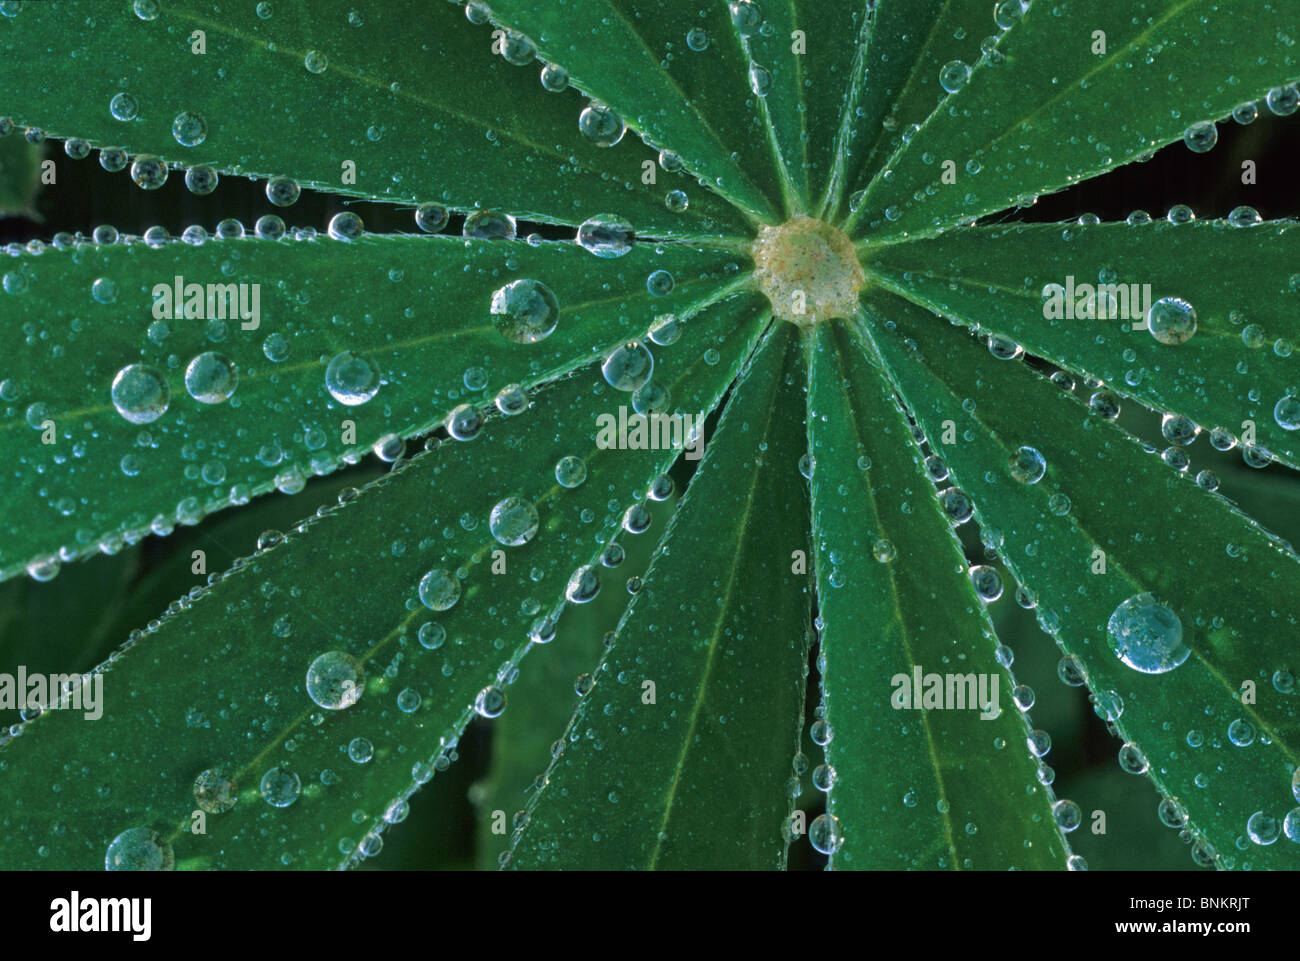 Nature physical detail close-up detail macro plant plant sheet lupin lupin sheet green color rope dew dewdrop water drop of Stock Photo